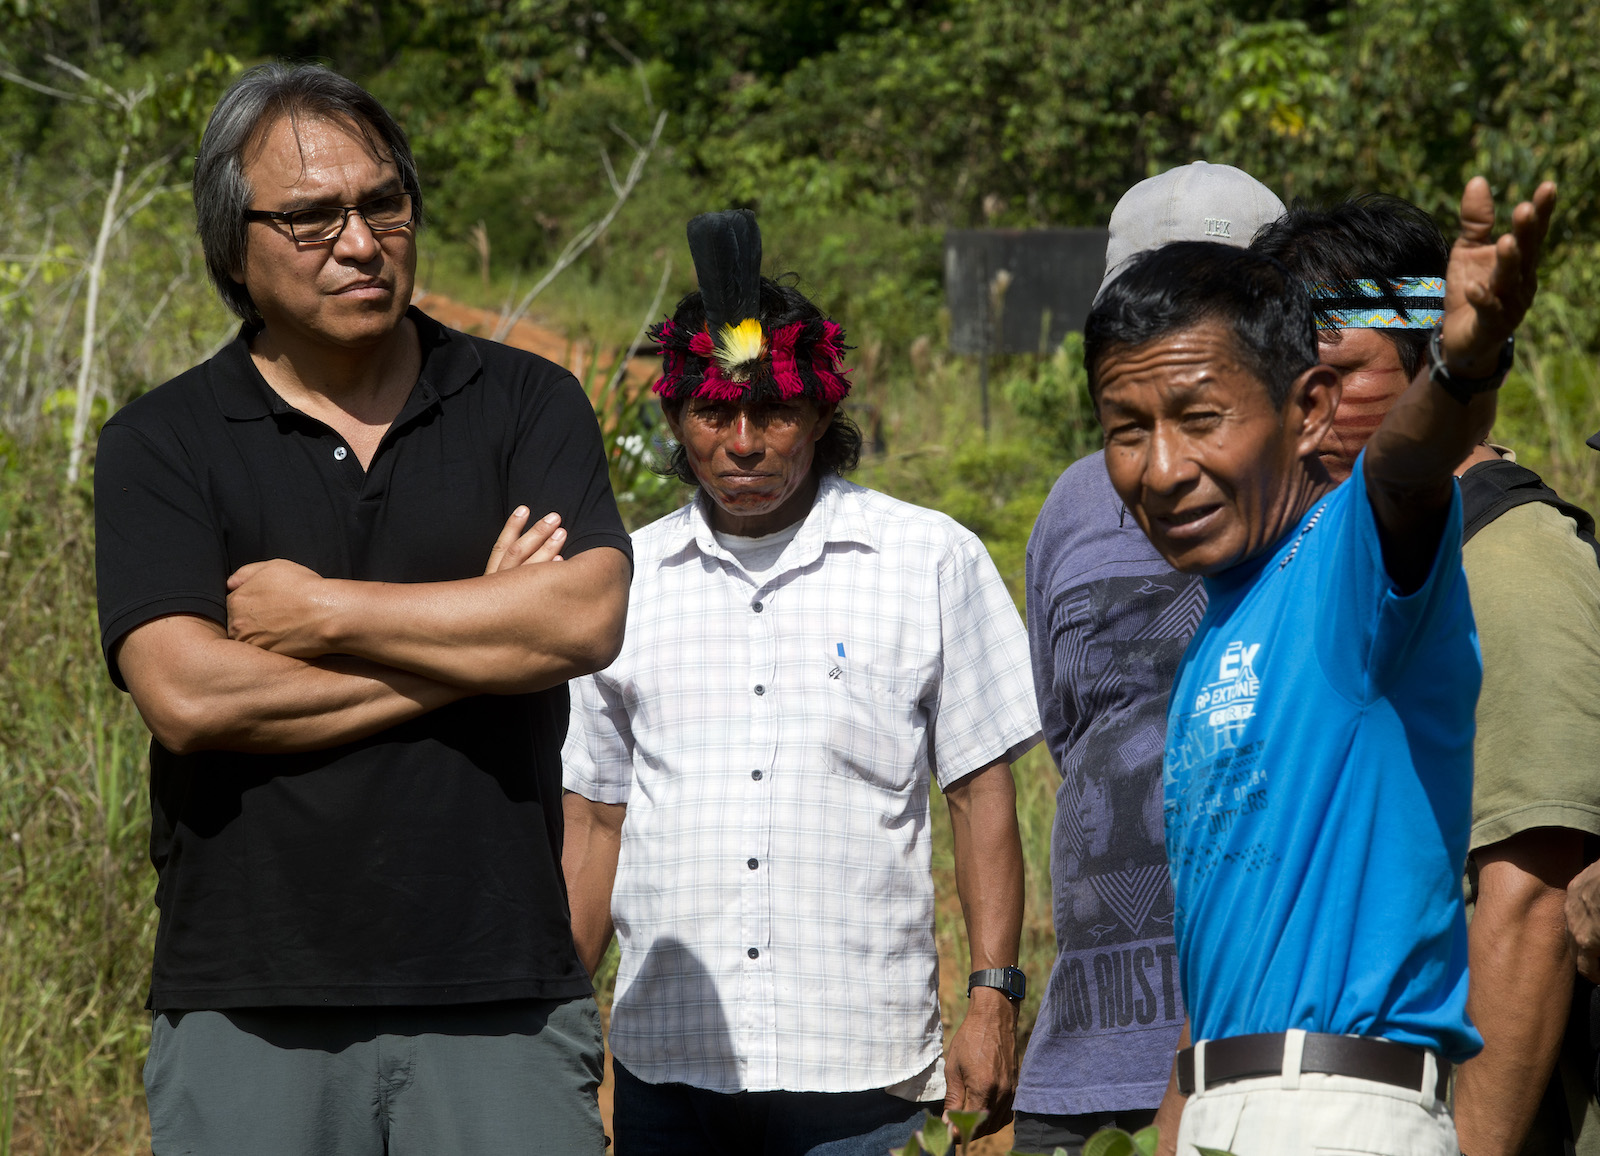 A man in a black shirt crosses his arms while talking to a group of other people. One person in a blue shirt gestures beyond the scene to the surrounding wilderness